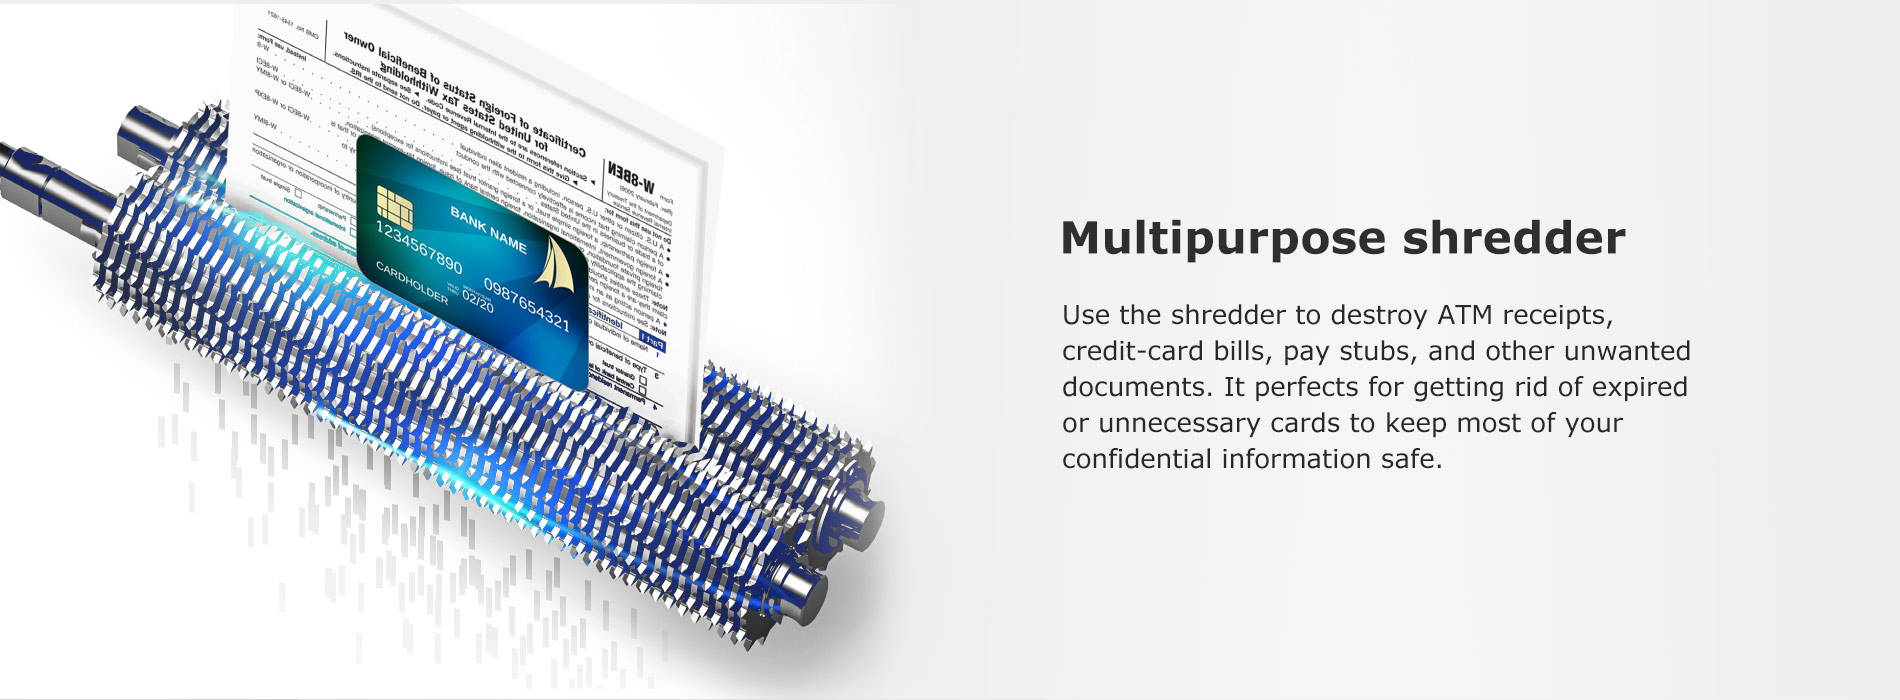 Multipurpose shredder Use the shredder to destroy ATM receipts, credit-card bills, pay stubs, and other unwanted documents. It perfects for getting rid of expired or unnecessary cards to keep most of your confidential information safe.